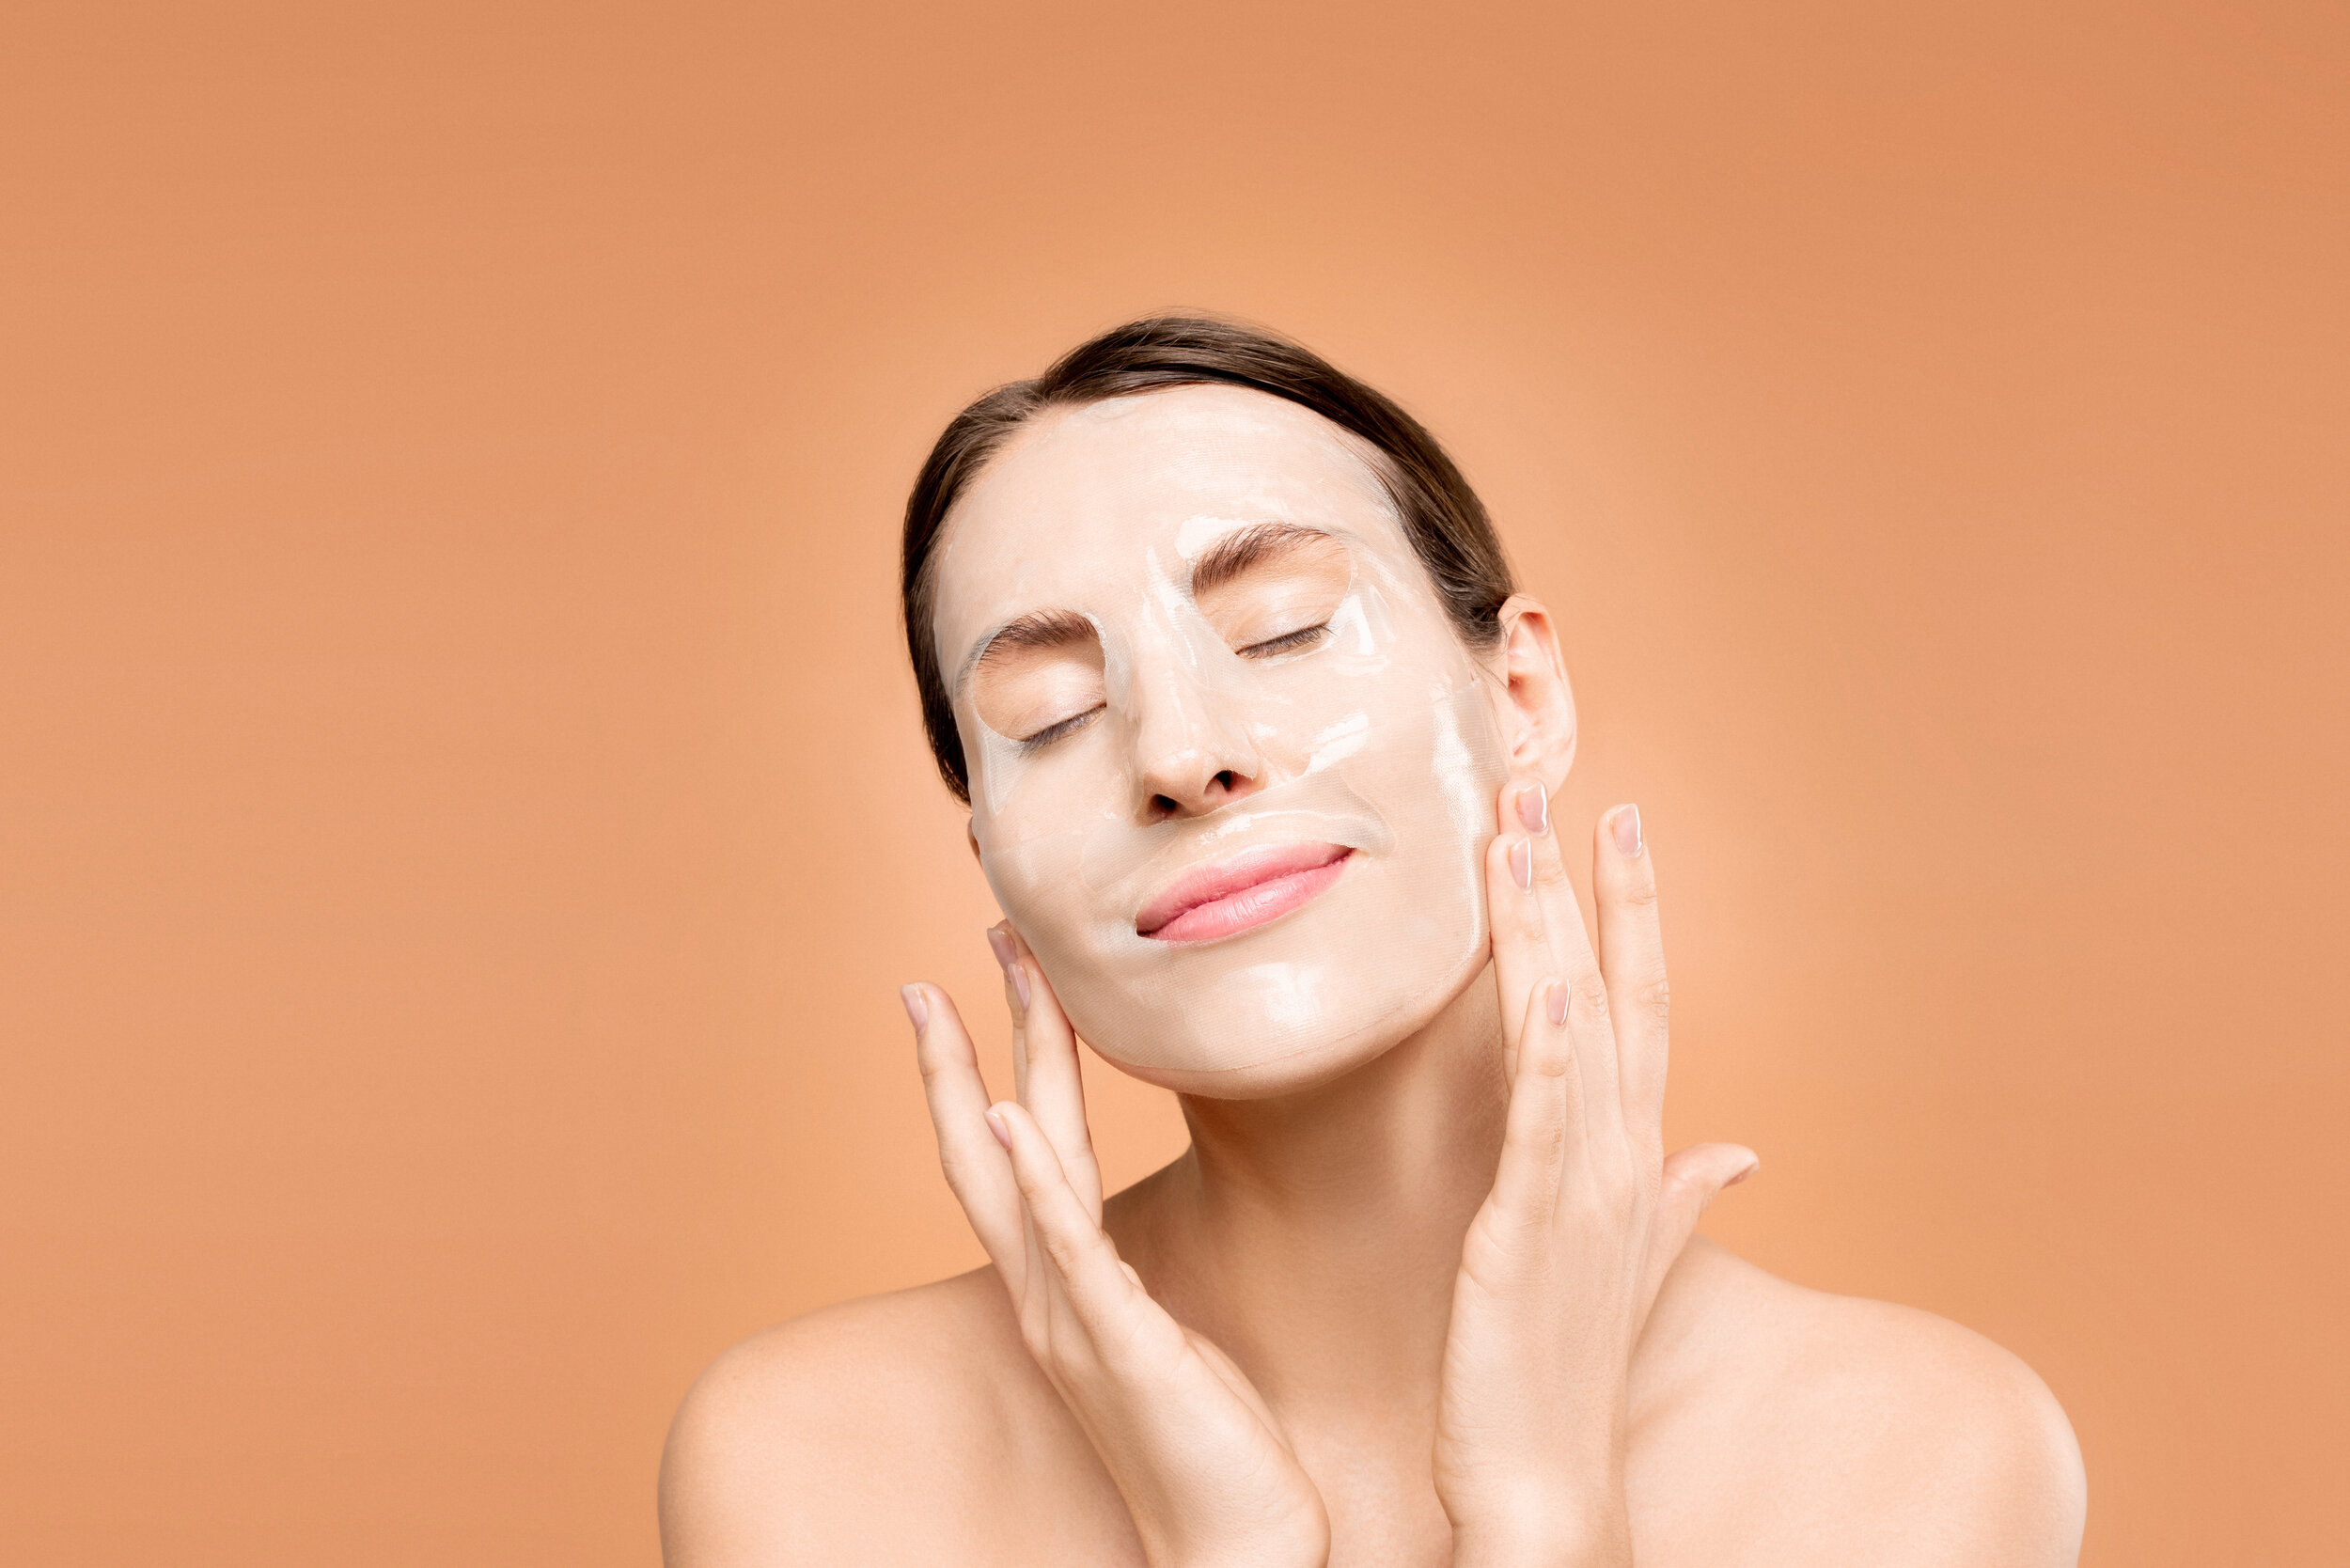 Canva - Woman With Facial Mask.jpg